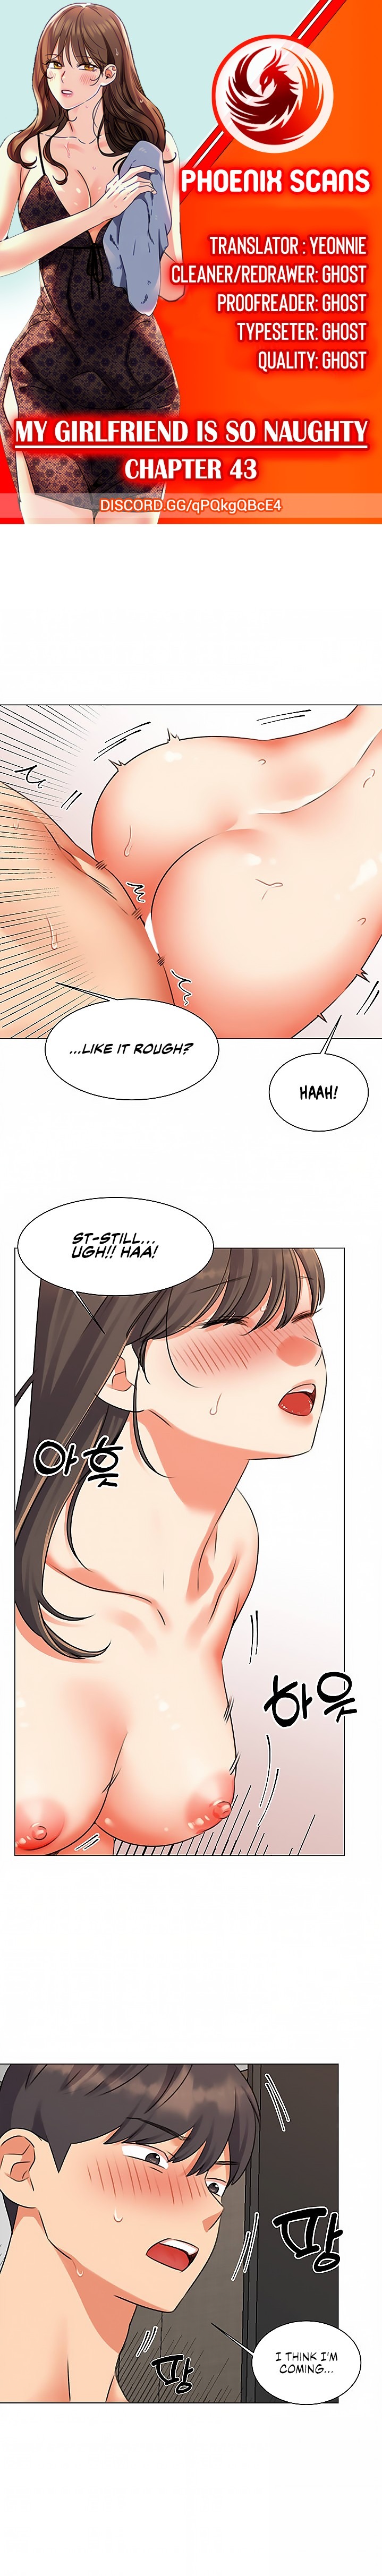 My girlfriend is so naughty Chapter 43 - Page 1